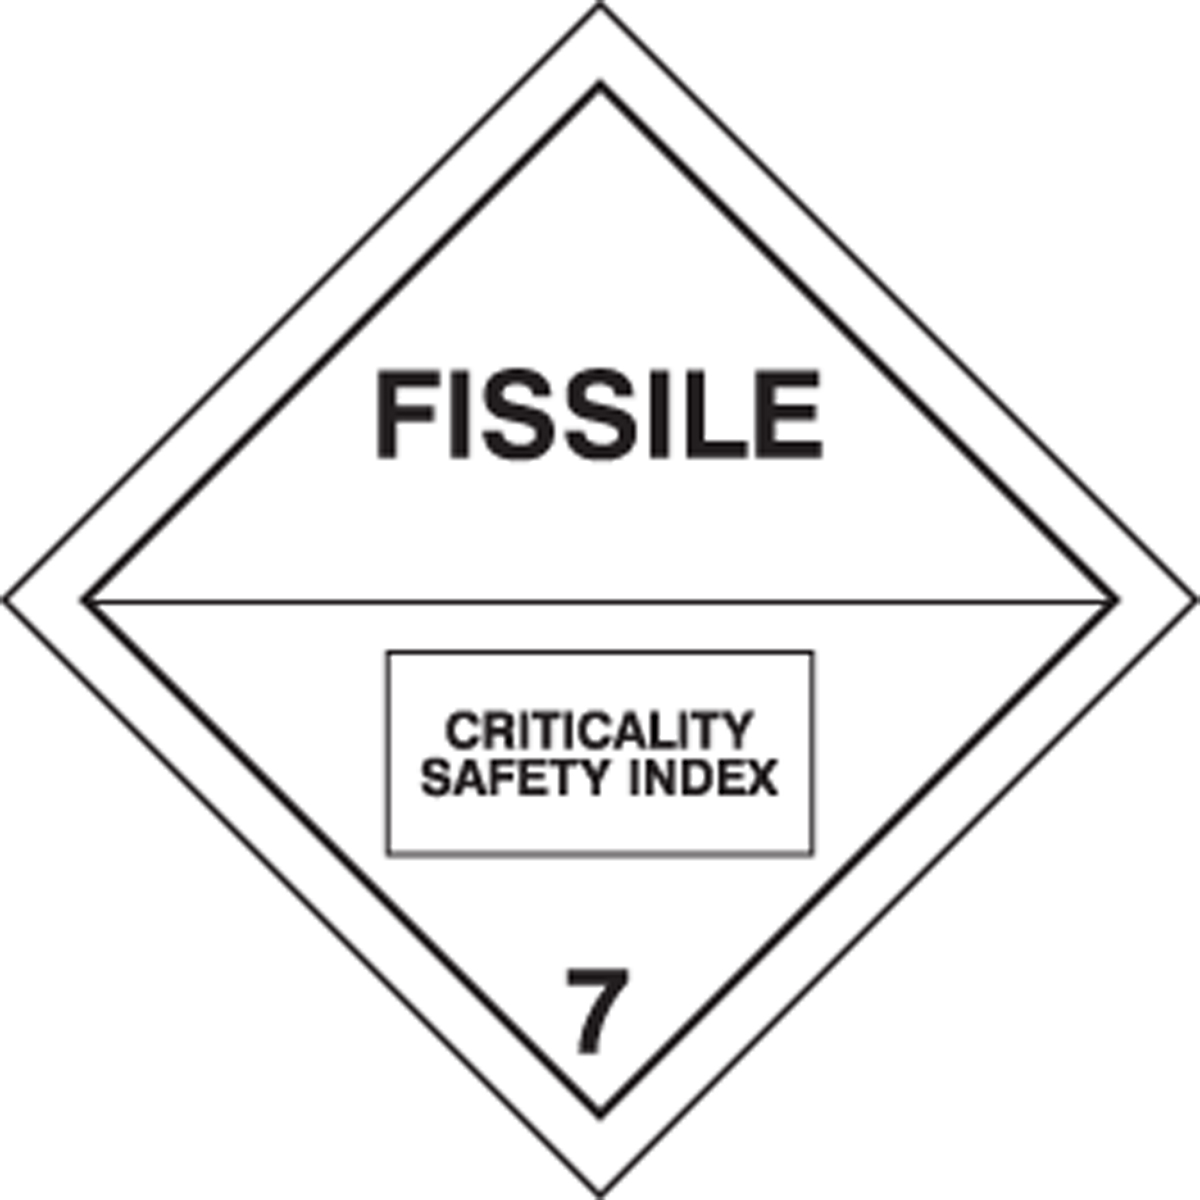 FISSILE CRITICALITY SAFETY INDEX